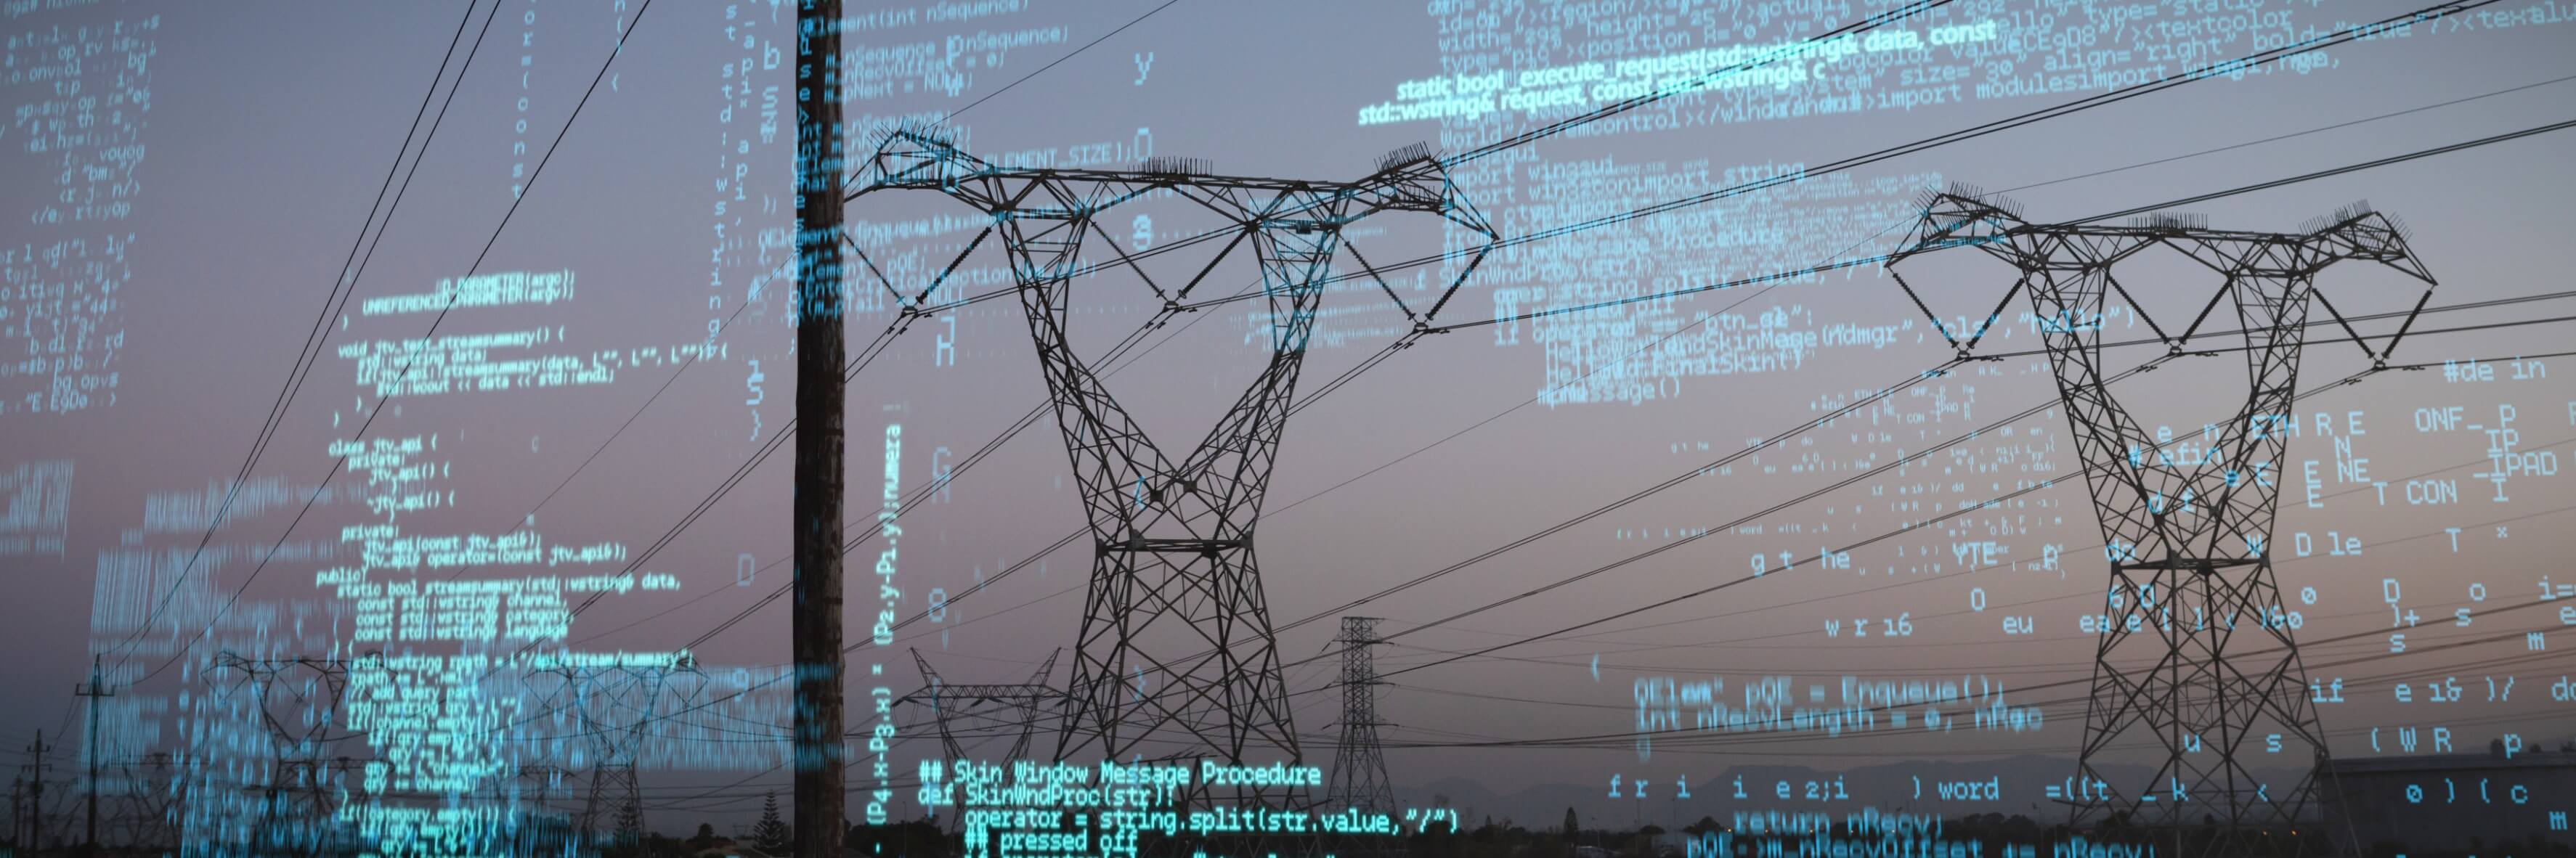 Energy Sector & Security: Why Energy Suppliers Need Good Cybersecurity